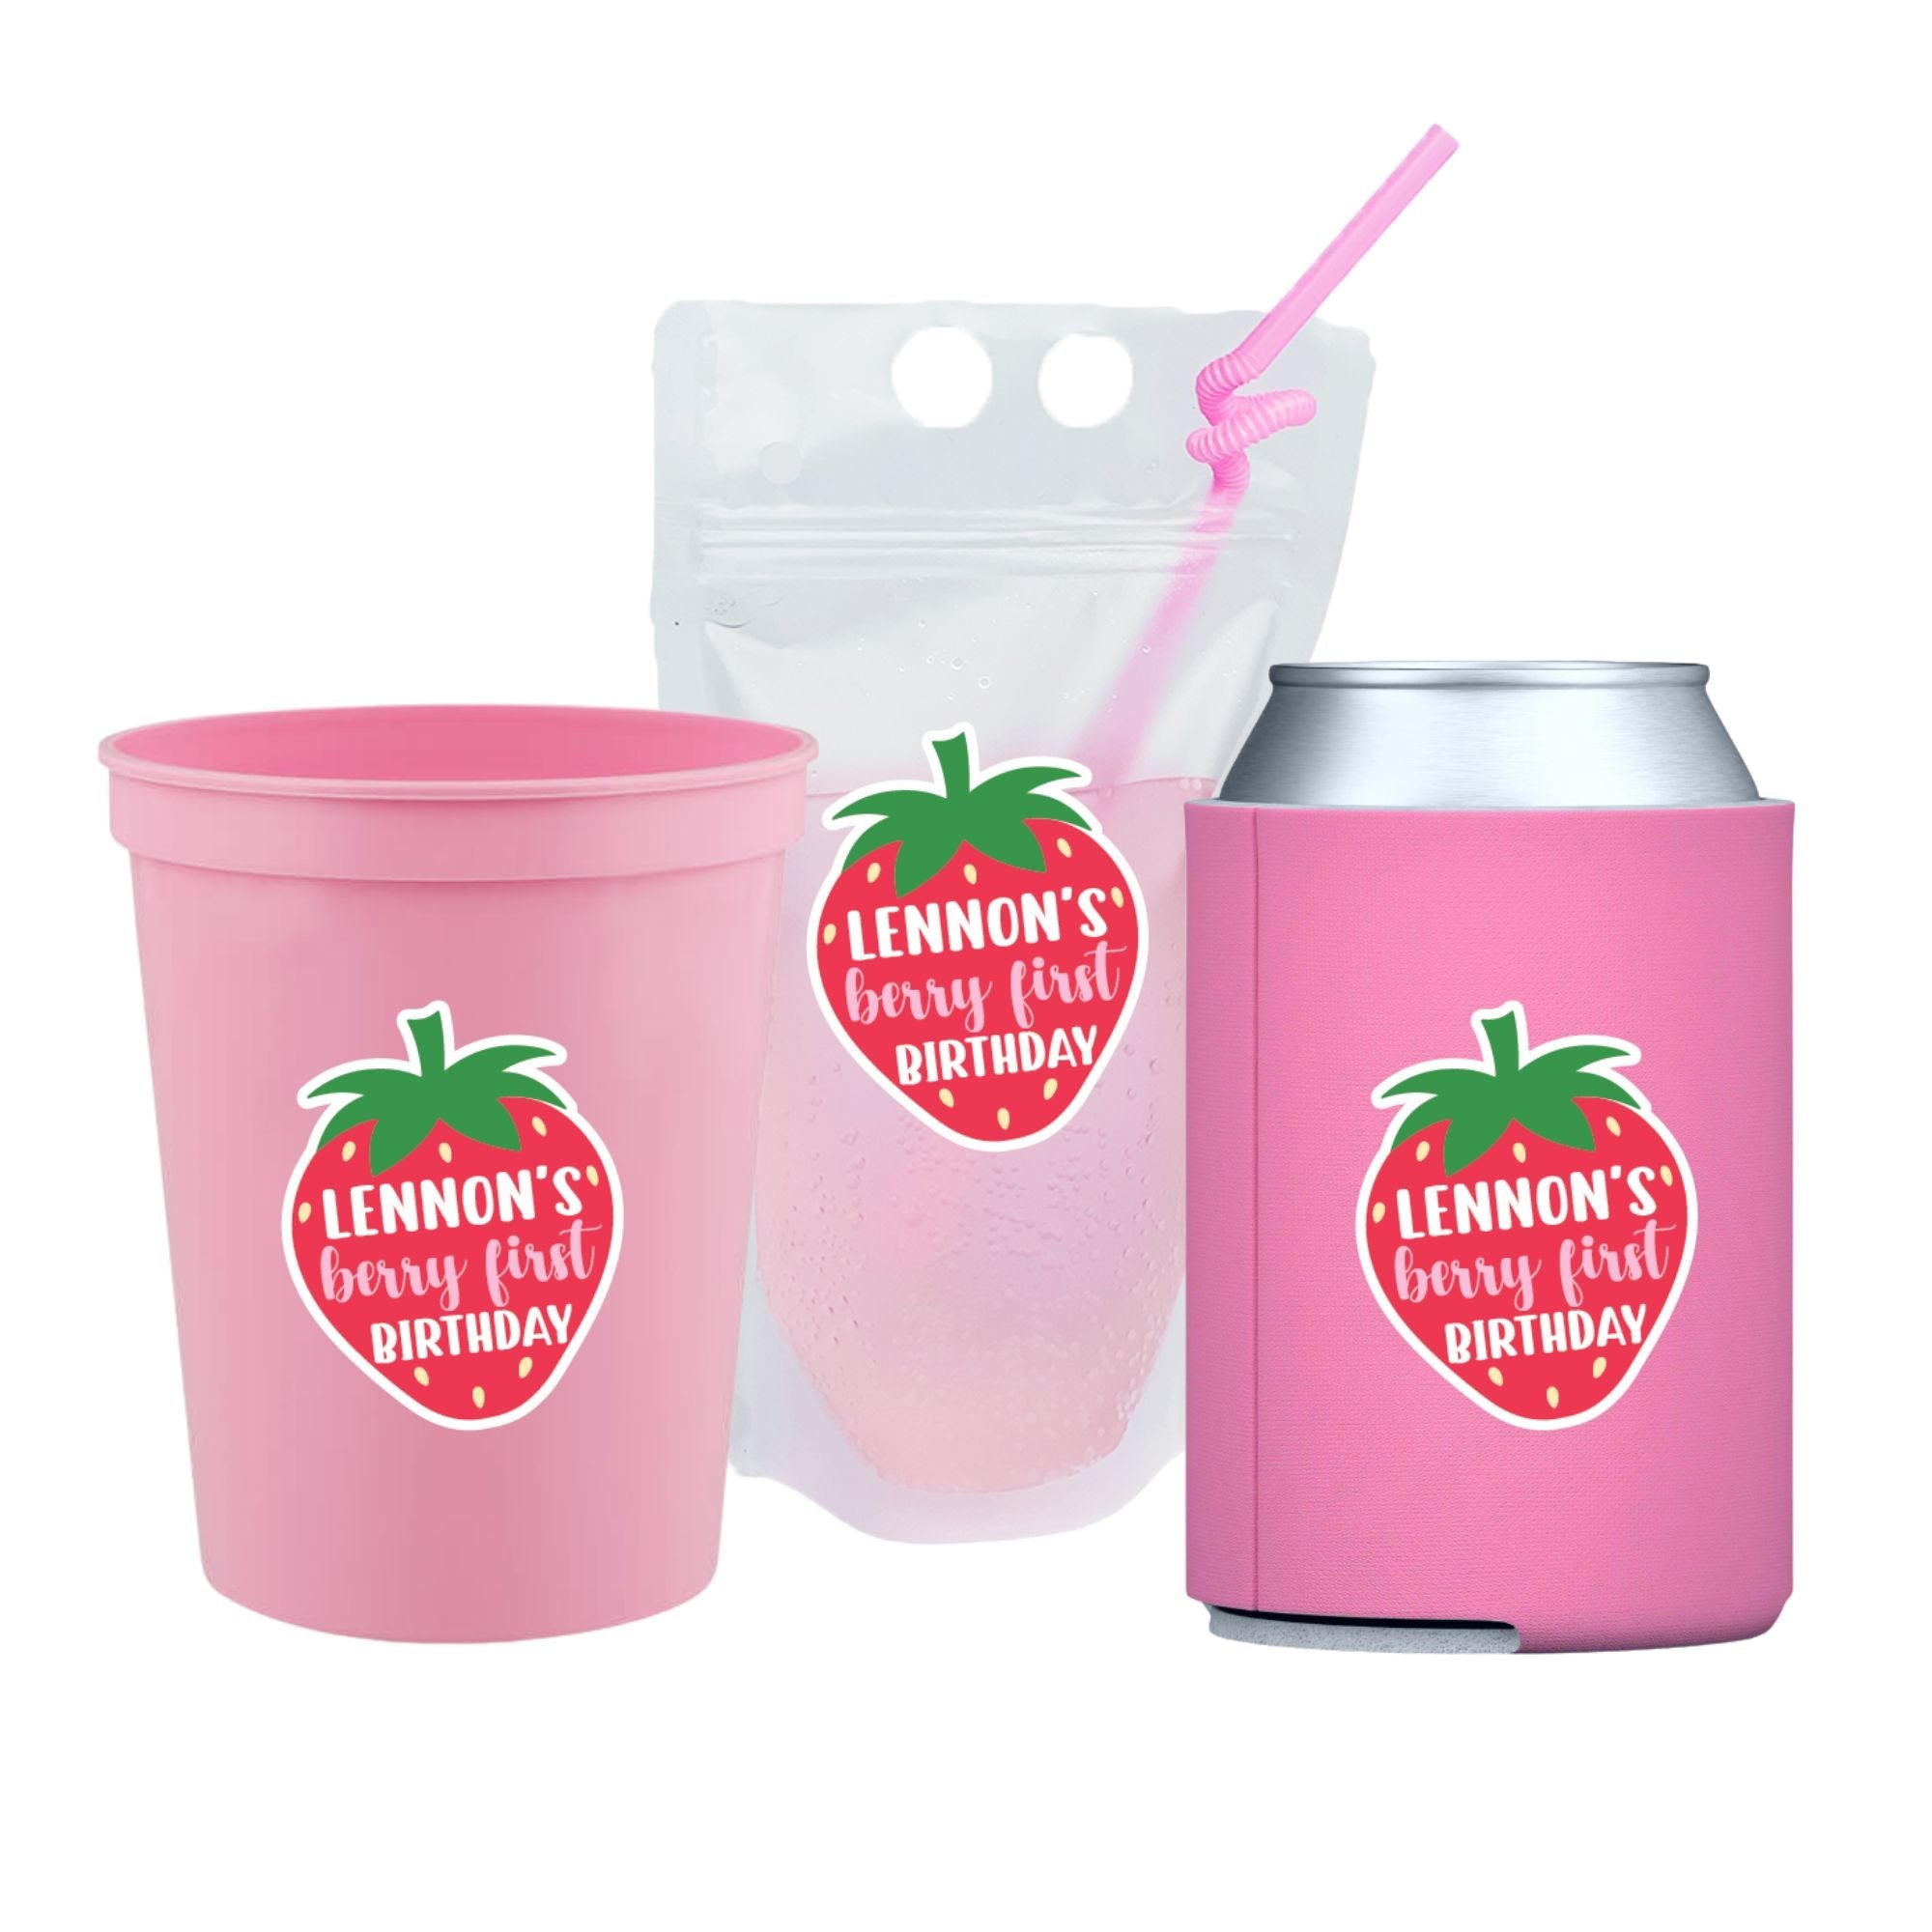 Custom Berry First Birthday Drinkware - Sprinkled With Pink #bachelorette #custom #gifts